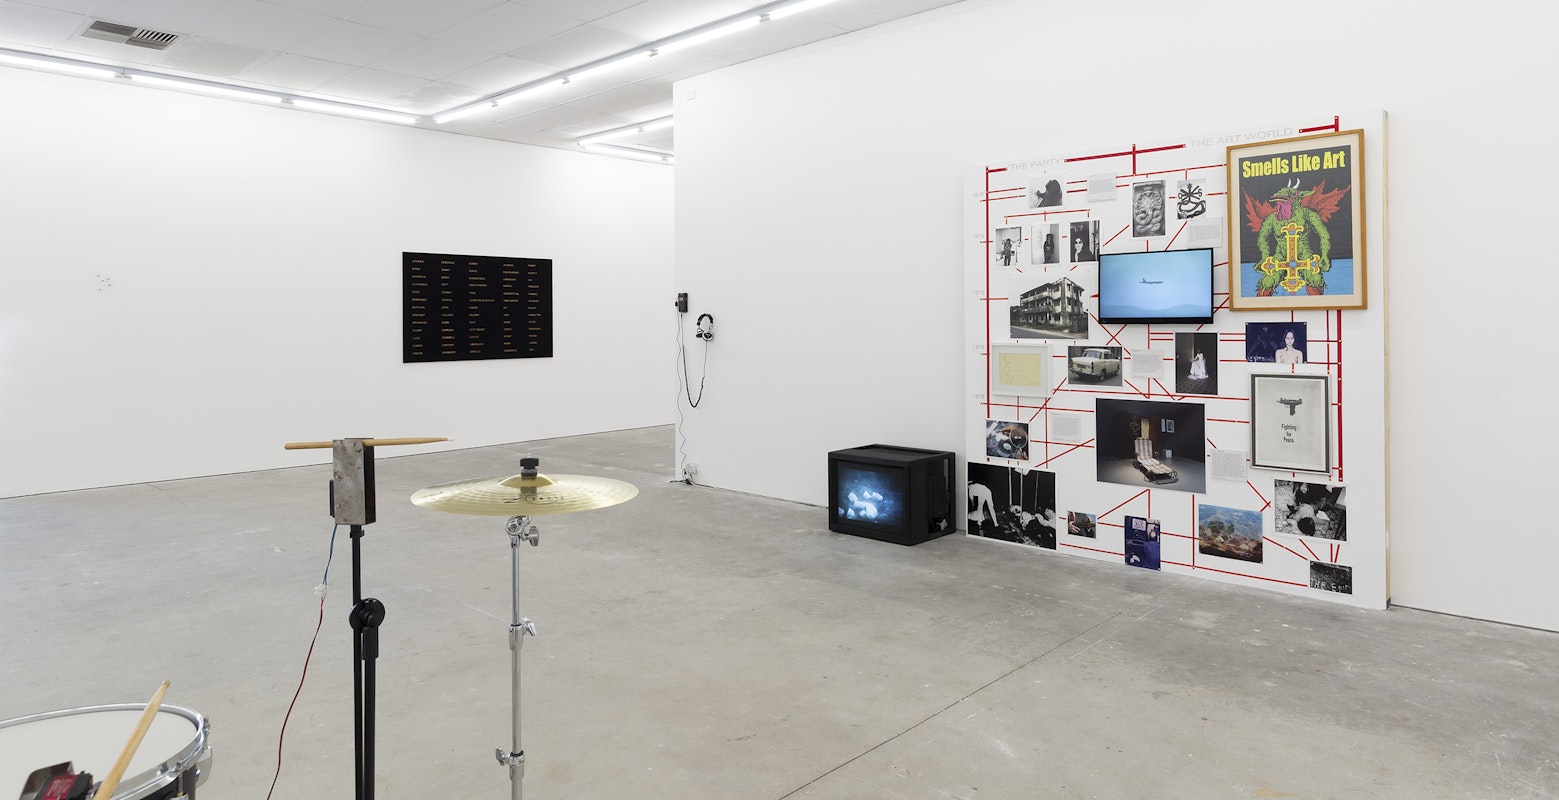 Installation view of Stupid As, curated by Alex Gawronski, featuring work by The Estate of Quinto Sesto and Sean Kerr, presented at Gertrude Contemporary 2024. Photo: Christian Capurro